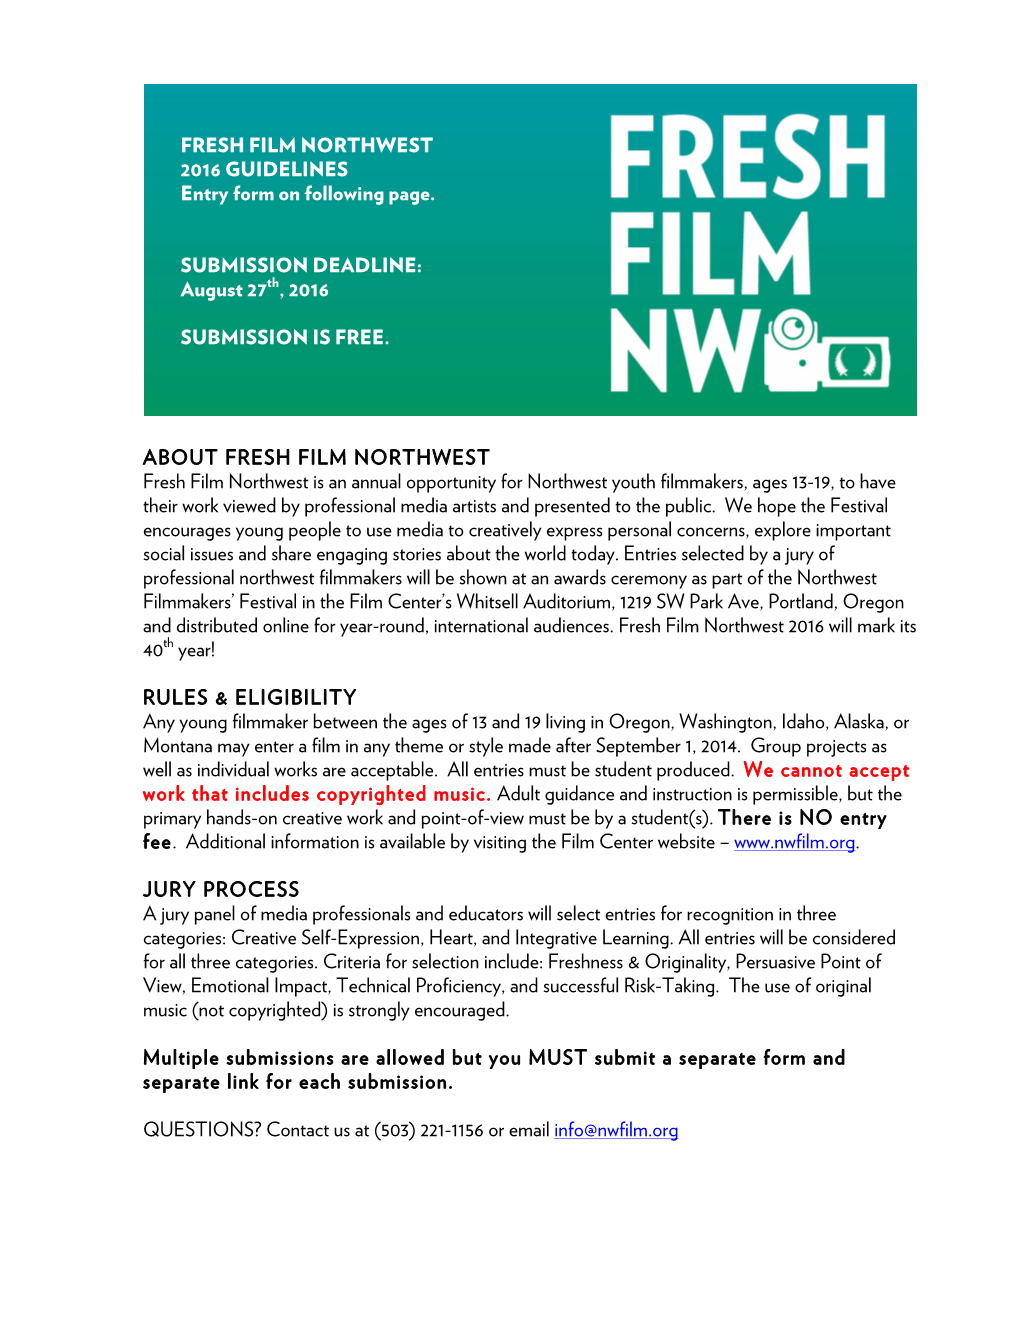 FRESH FILM NORTHWEST 2016 GUIDELINES Entry Form on Following Page